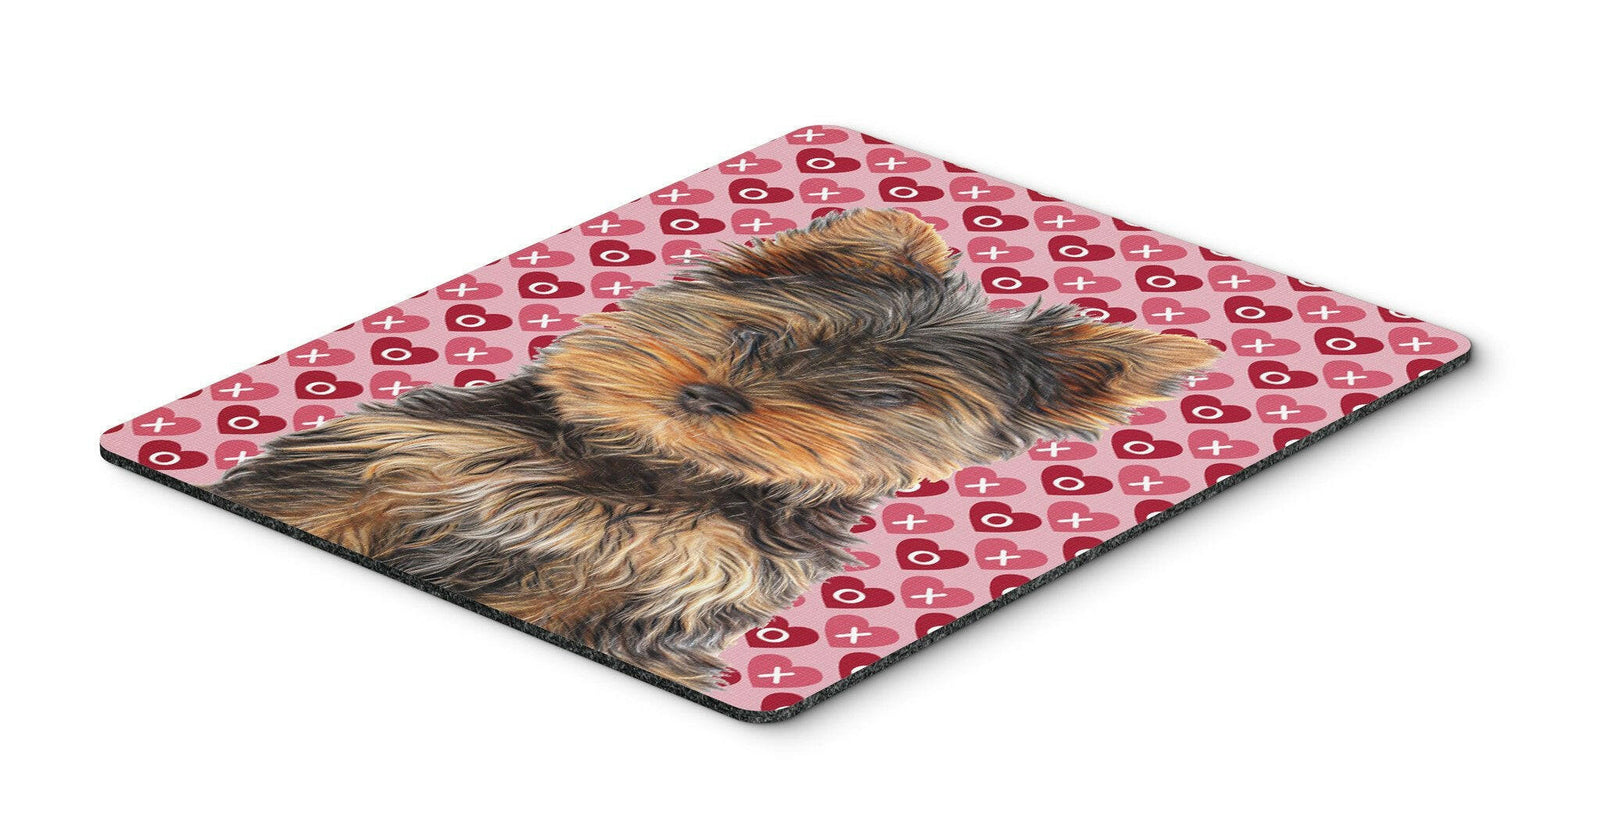 Hearts Love and Valentine's Day Yorkie Puppy / Yorkshire Terrier Mouse Pad, Hot Pad or Trivet KJ1195MP by Caroline's Treasures